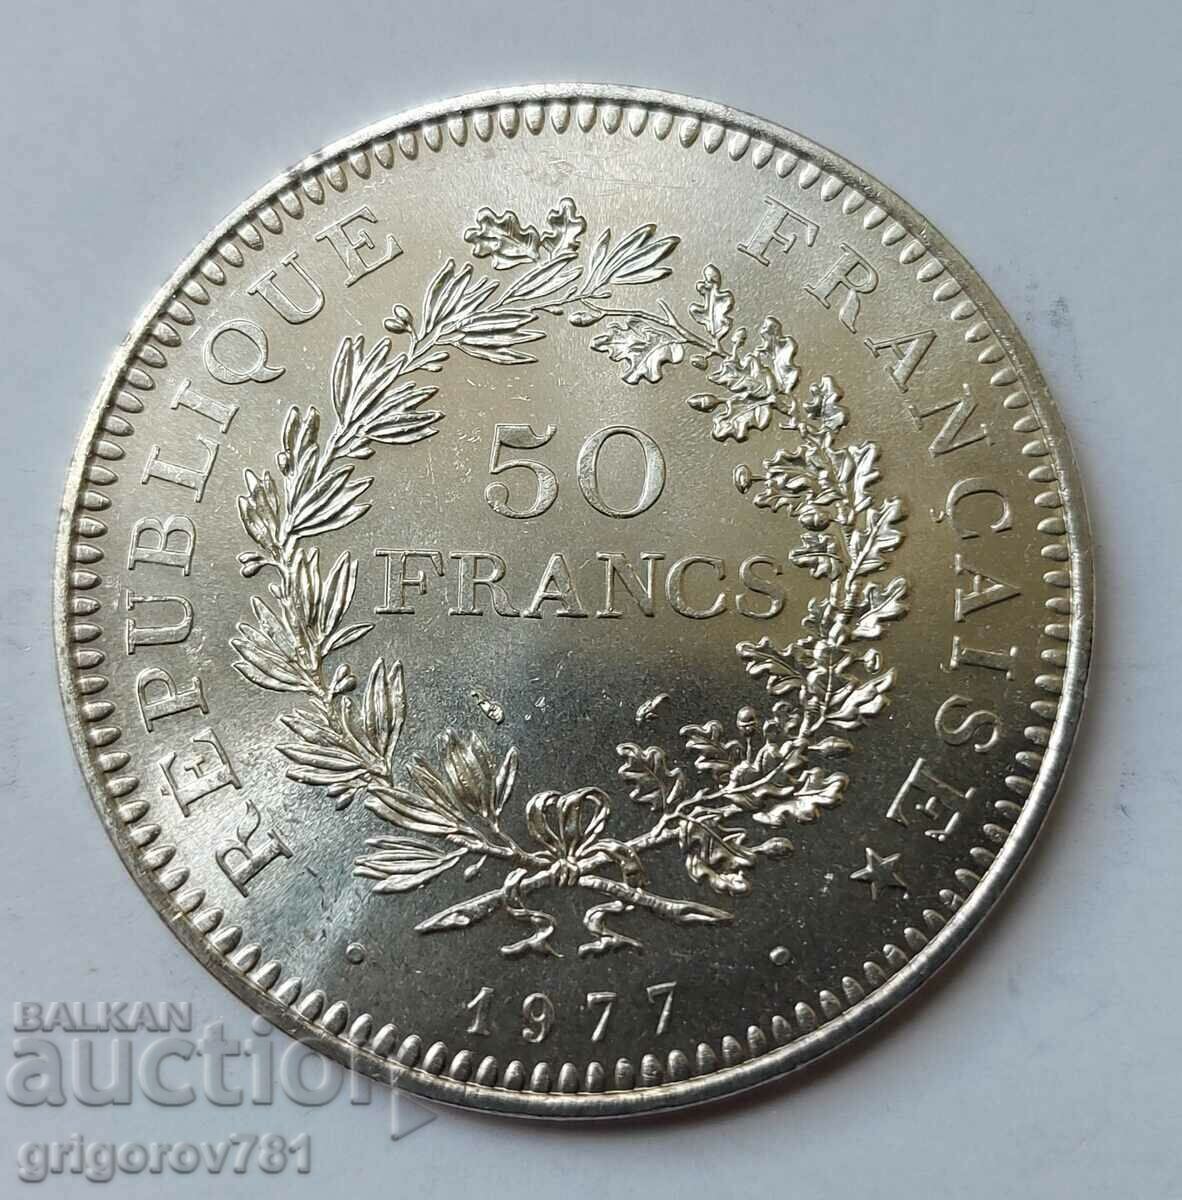 50 Francs Silver France 1977 - Silver Coin #38